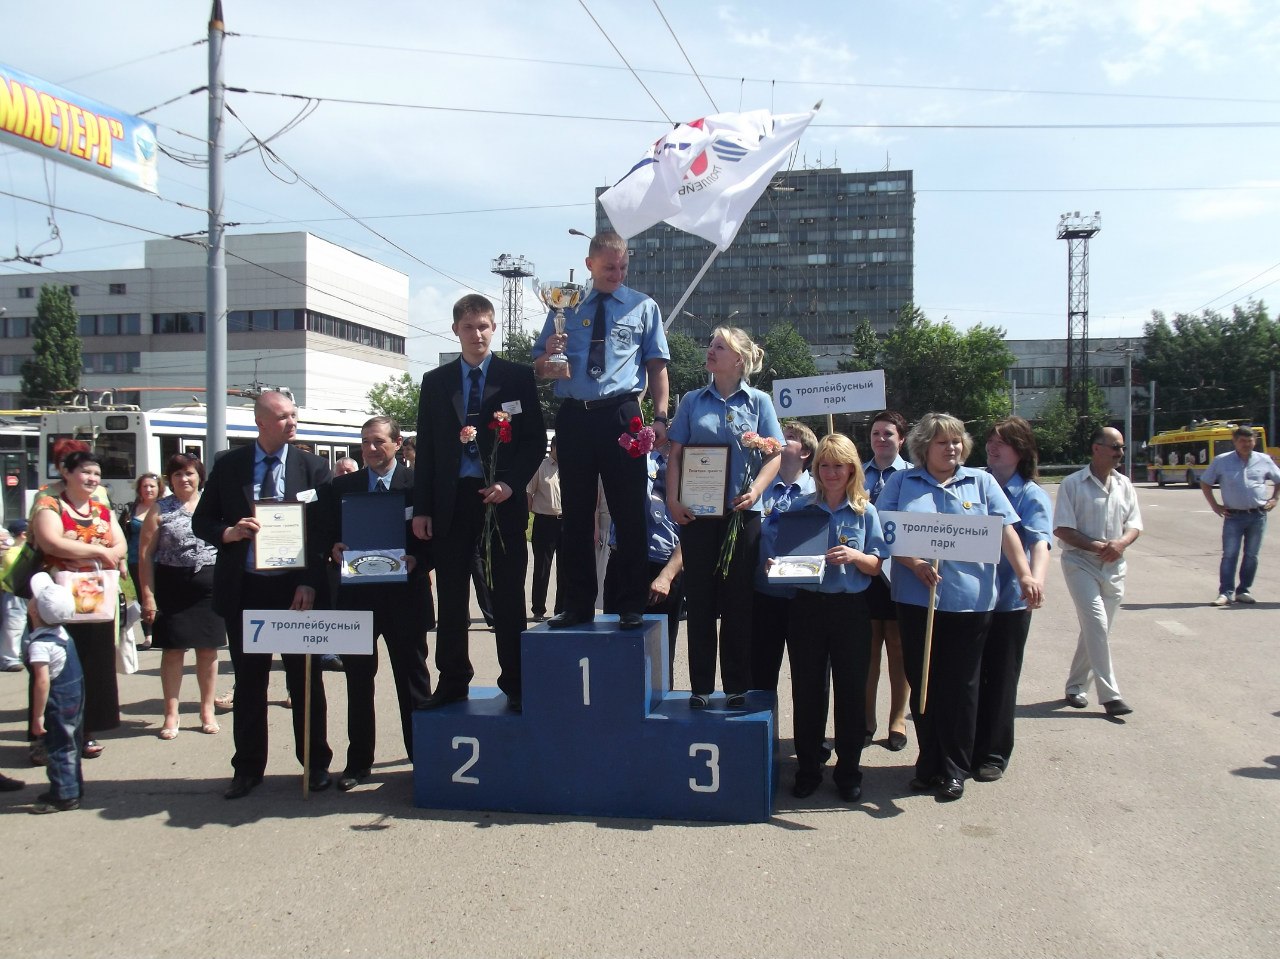 Moscova — 34th Championship of Trolleybus Drivers